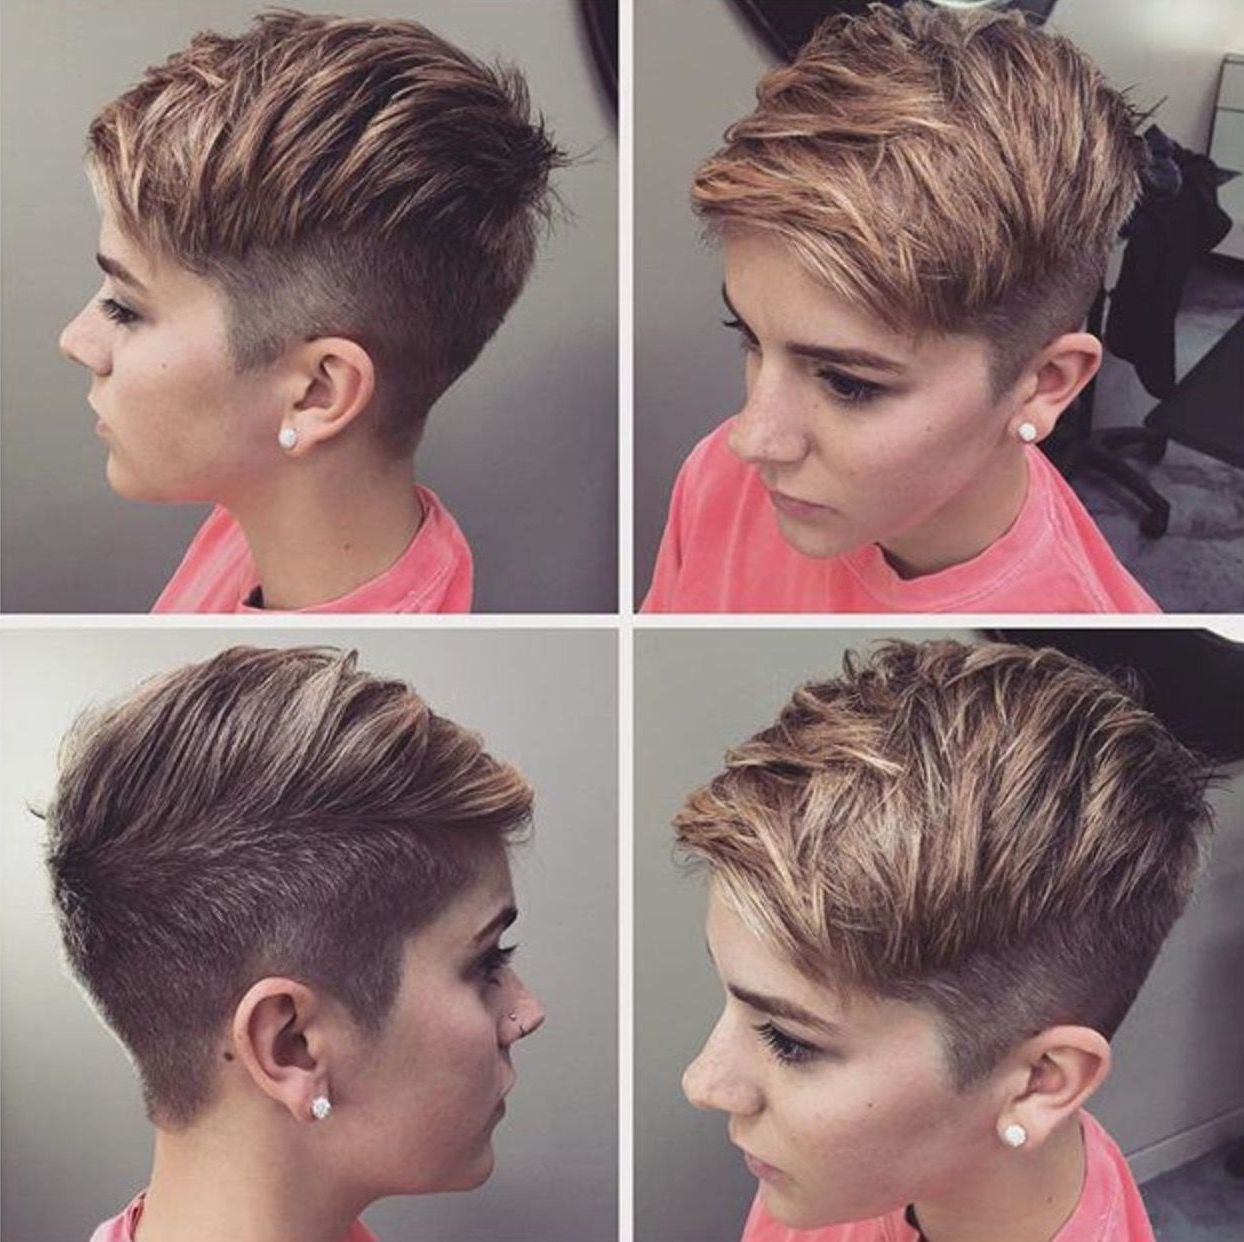 Pinrita Sanchez On Hair In 2019 | Short Hair Styles With Short Tapered Pixie Upwards Hairstyles (View 9 of 20)